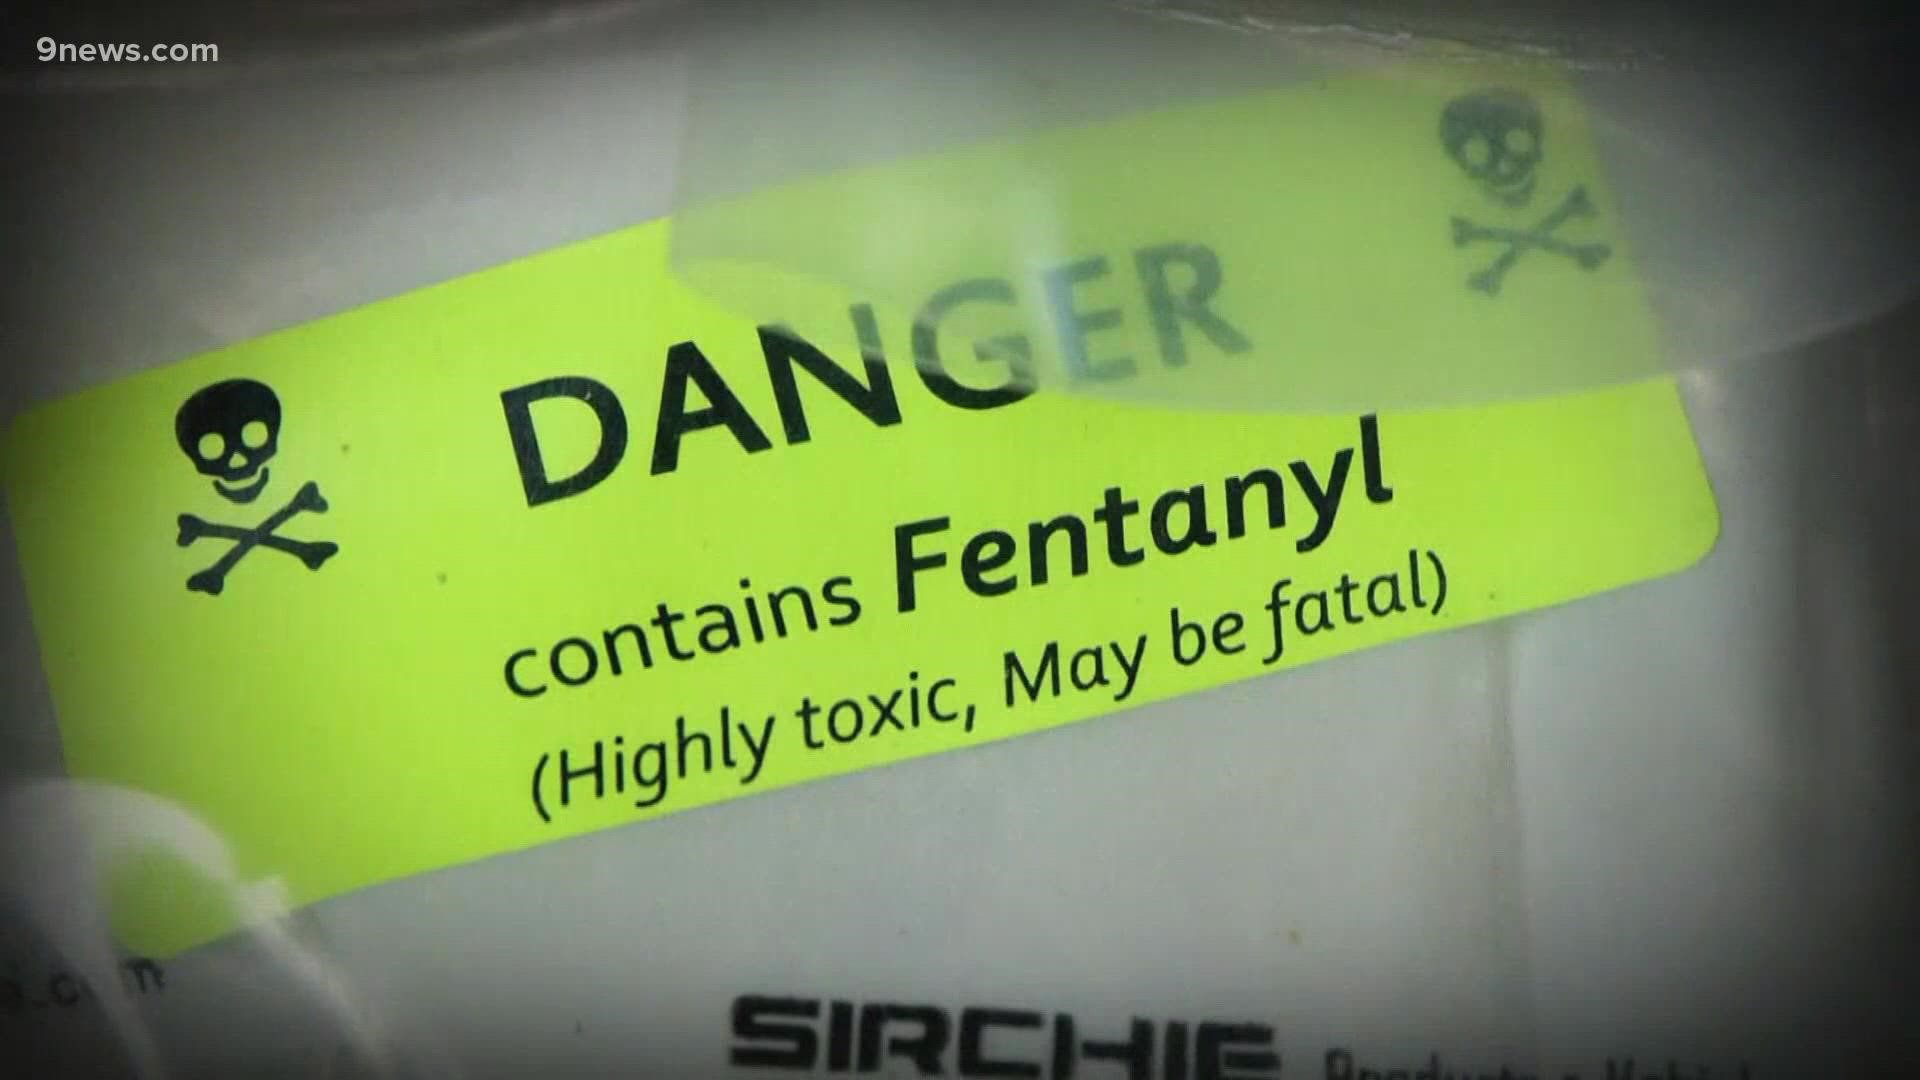 Registered nurse Shannon Weir discusses why fentanyl is so dangerous and how people in addiction can seek treatment.